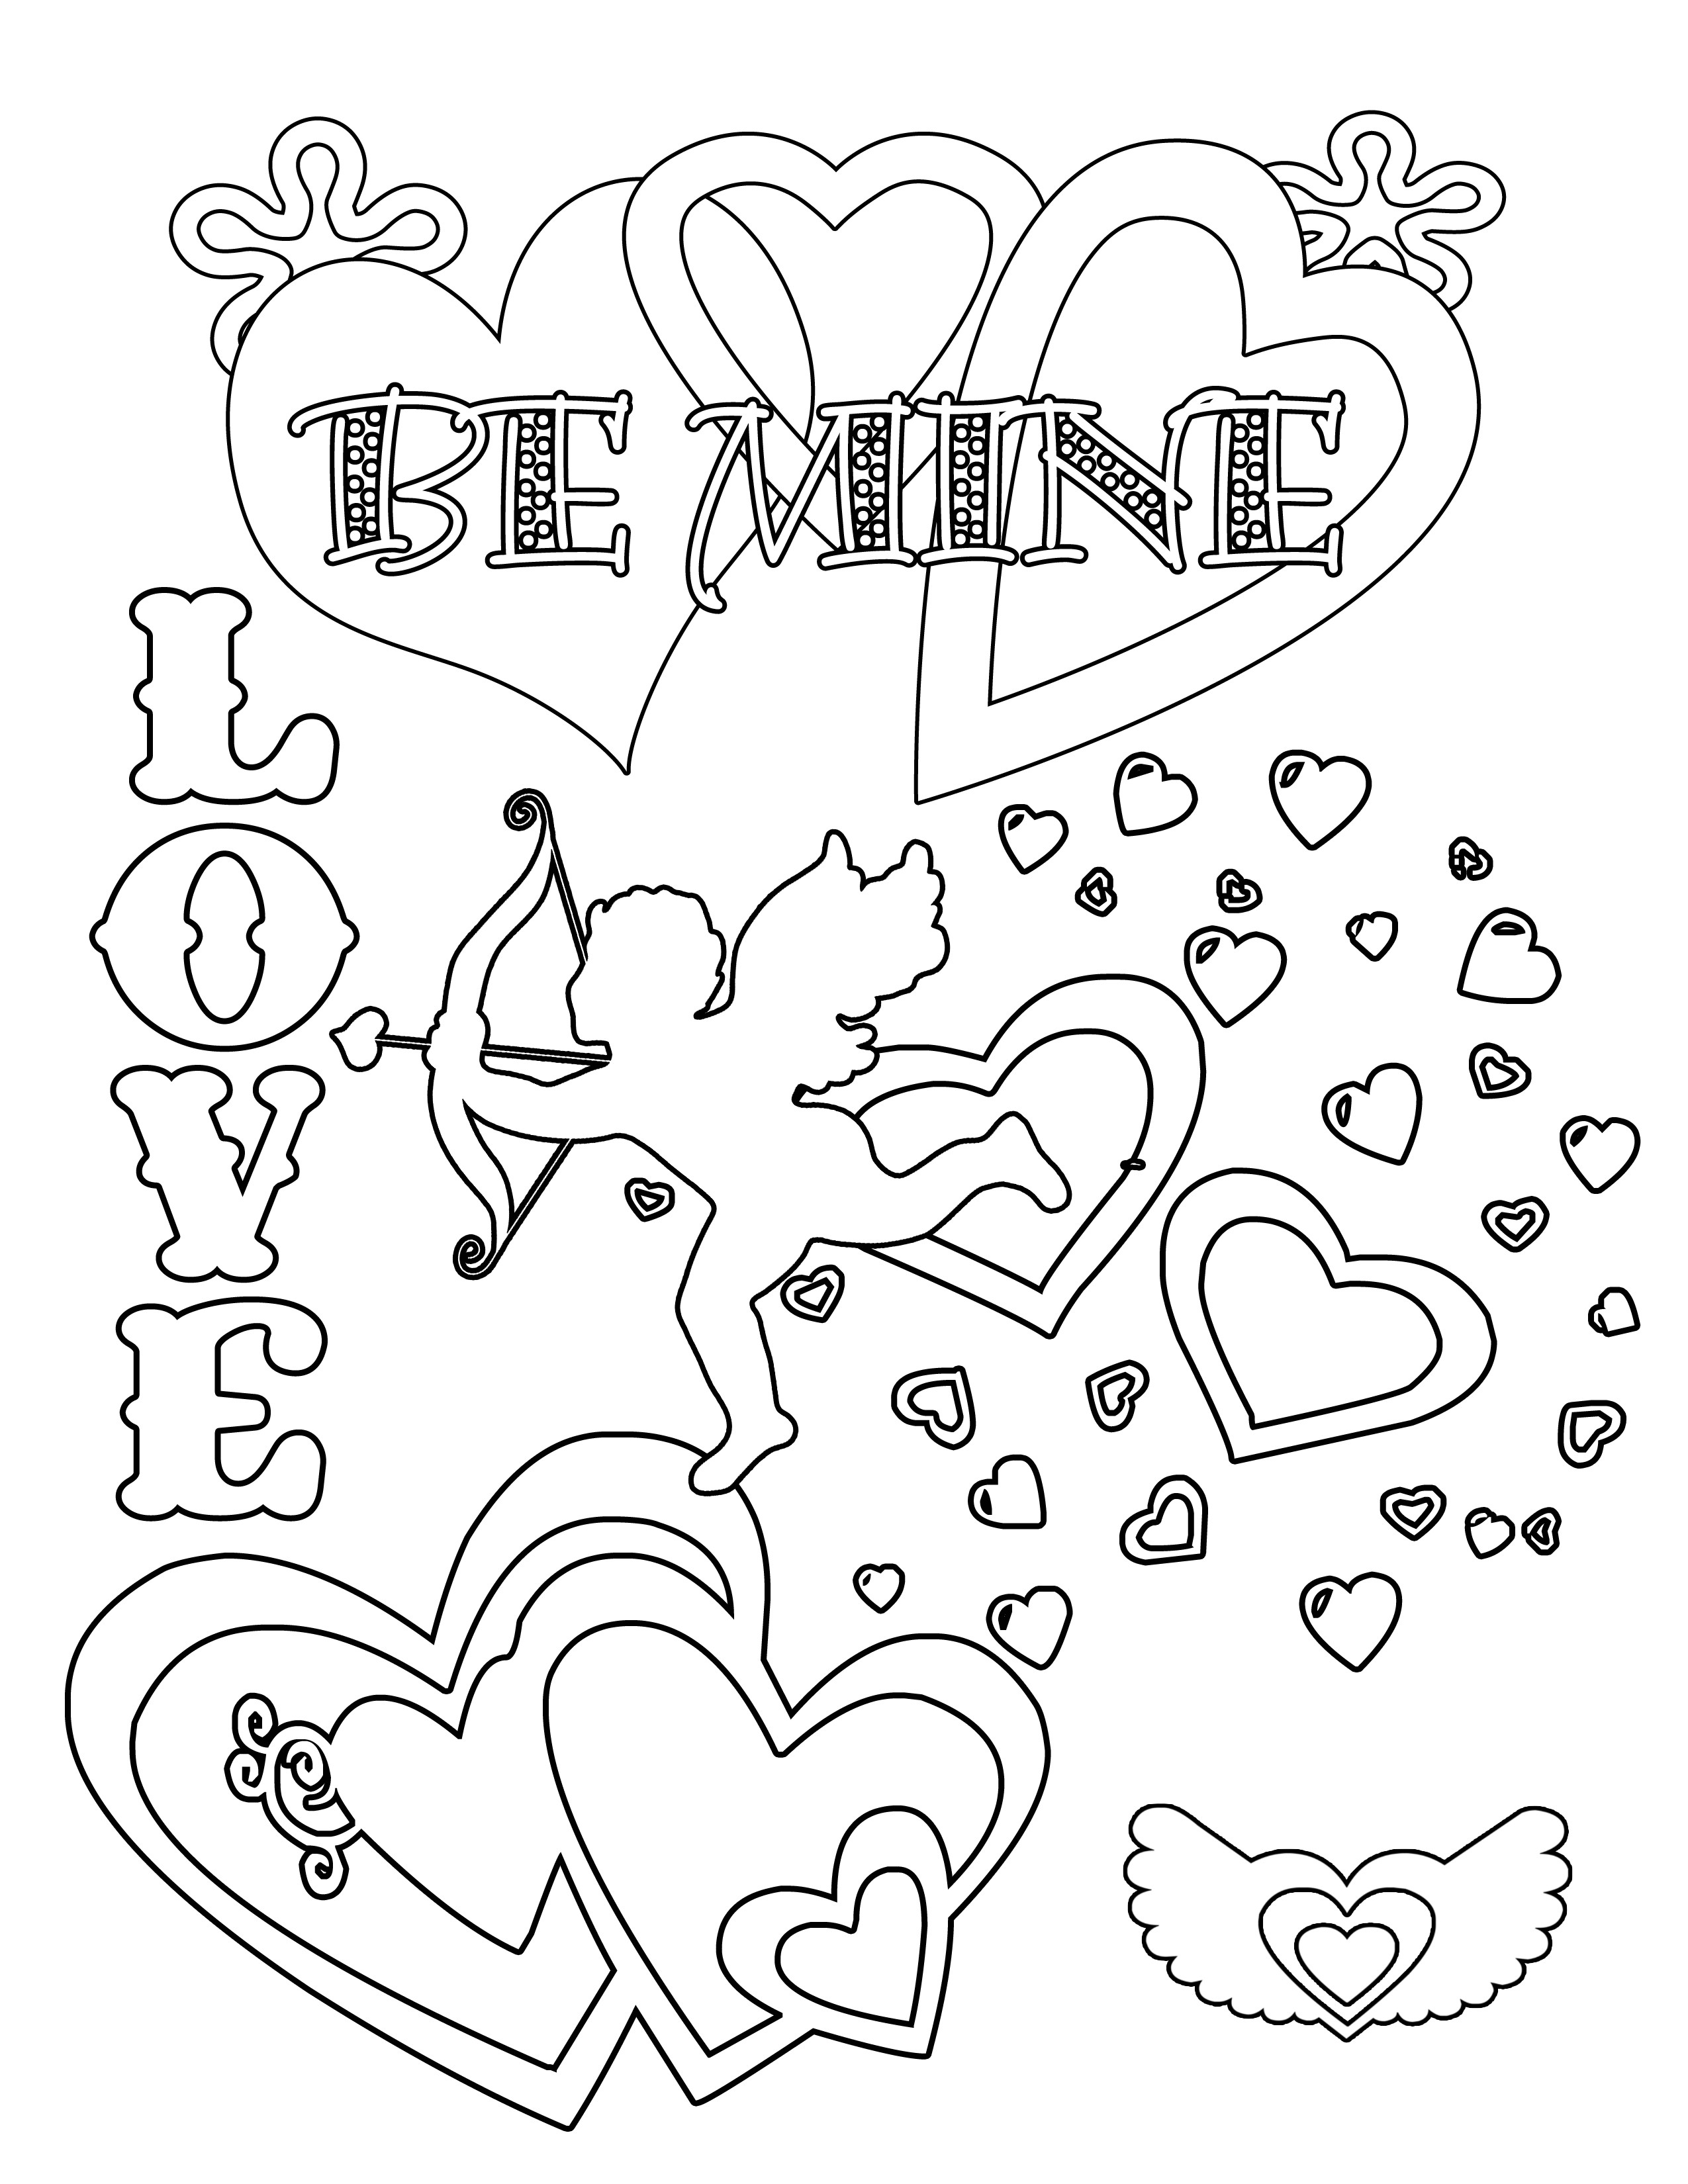 Valentines Coloring Pages For Kids
 Valentine Coloring Pages Best Coloring Pages For Kids